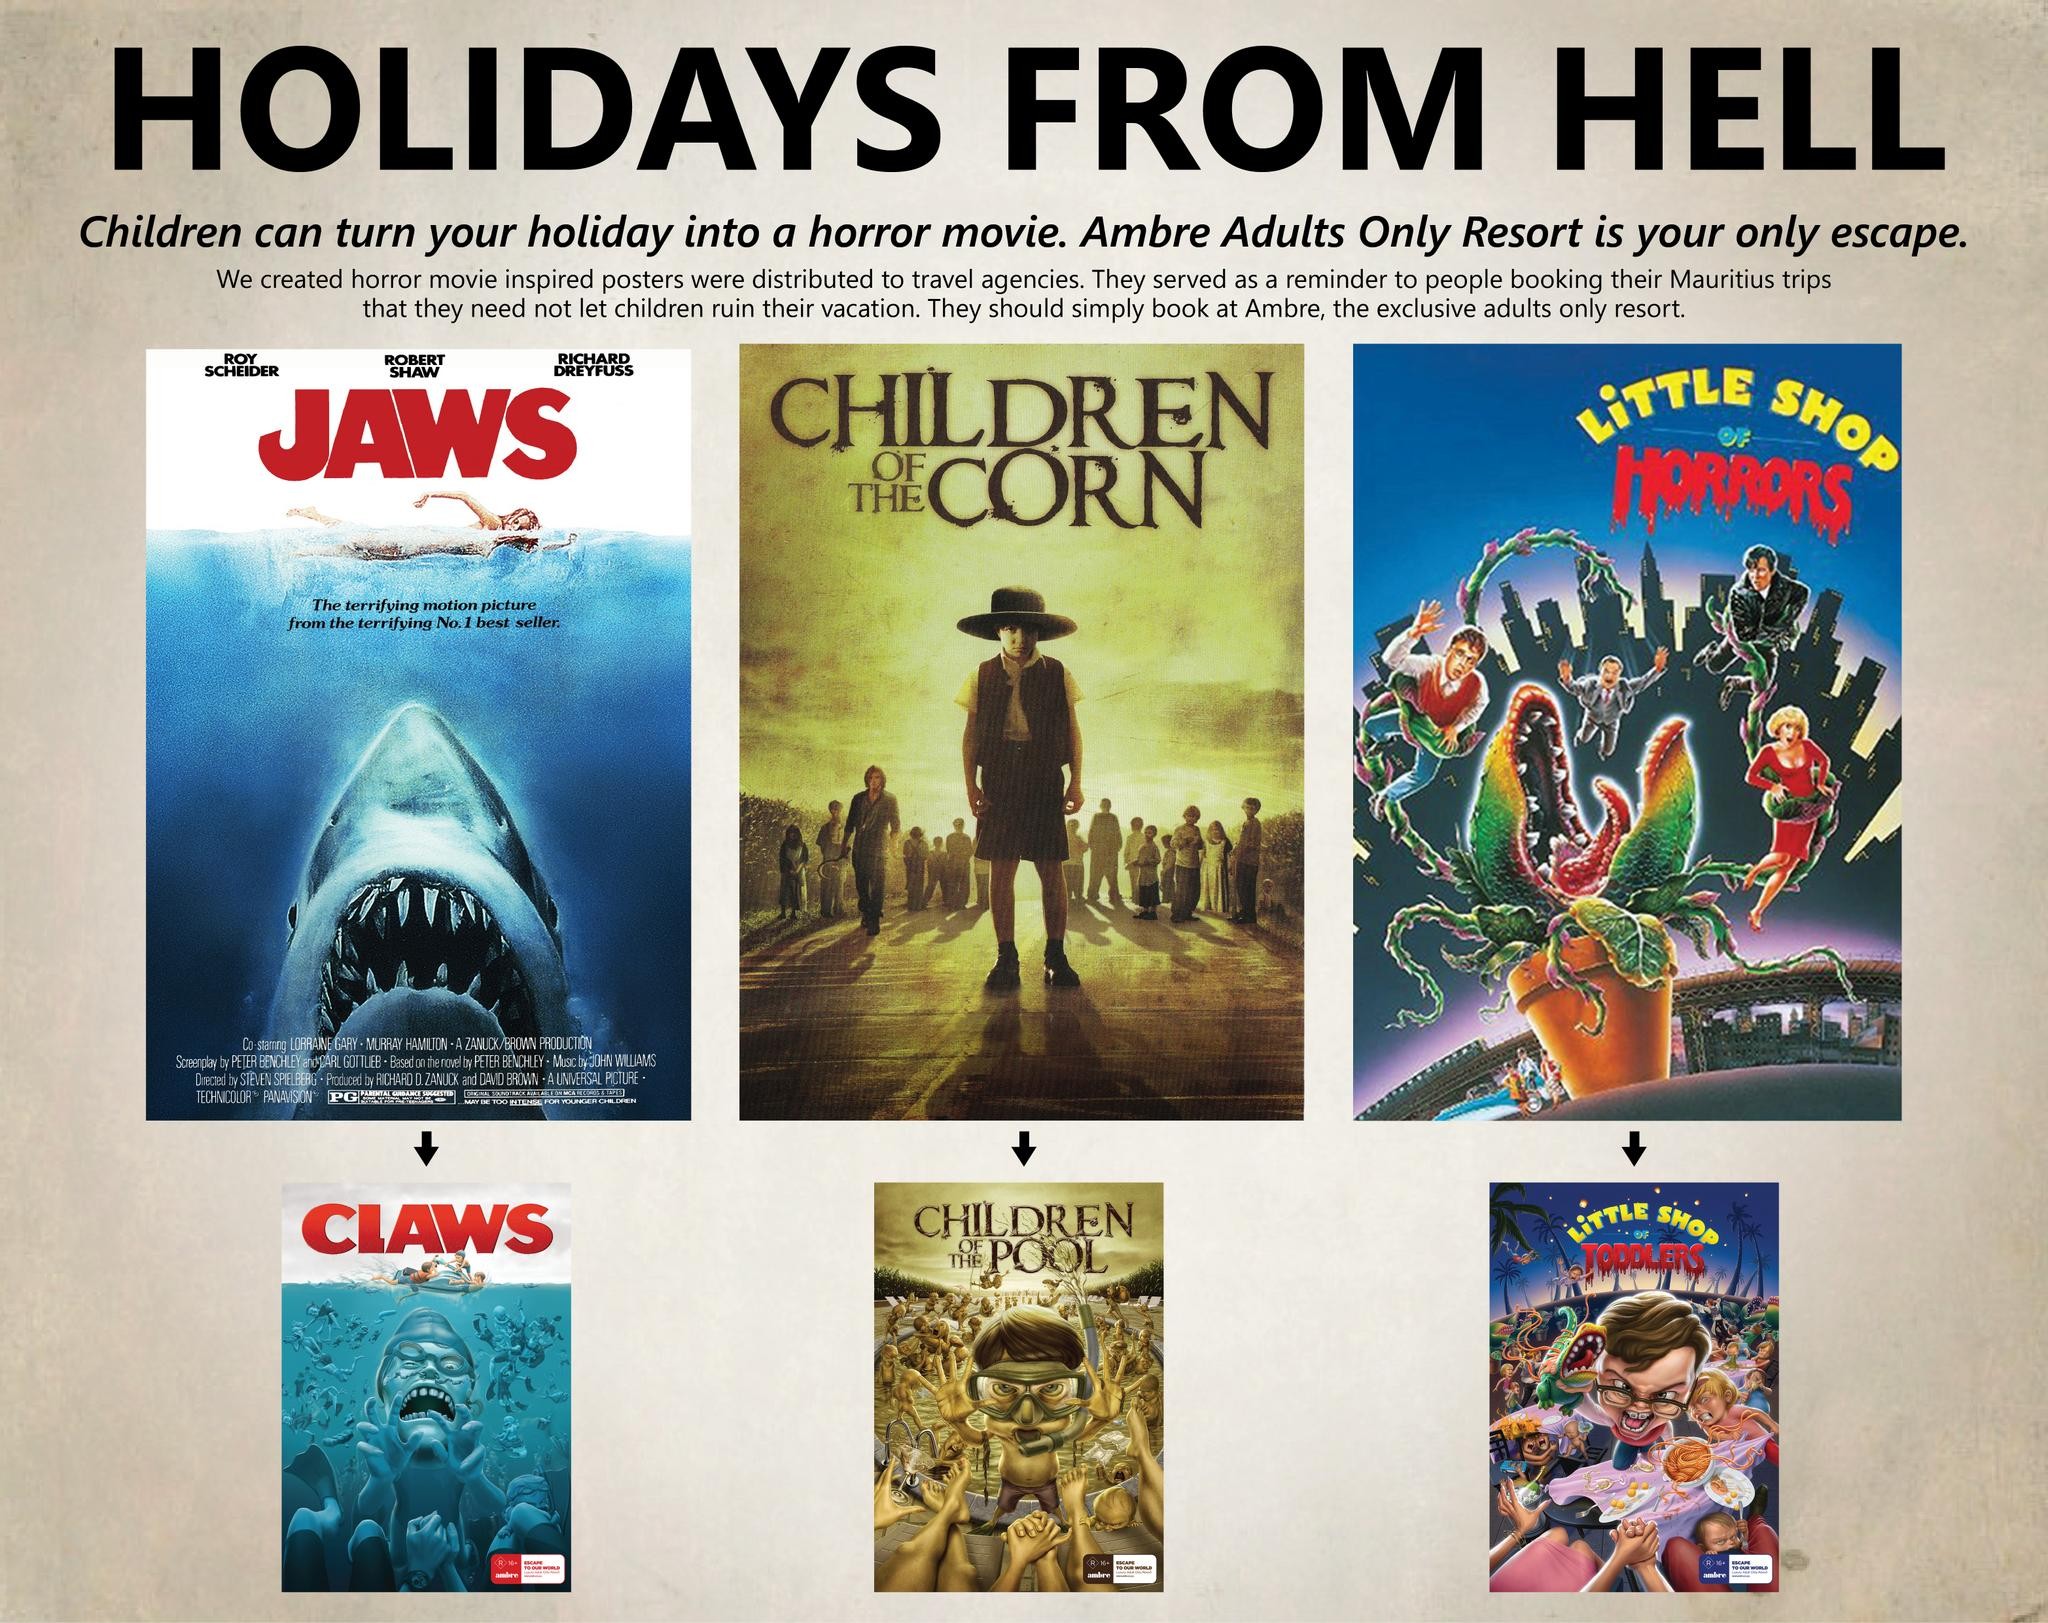 HOLIDAYS FROM HELL: CLAWS, CHILDREN OF THE POOL, LITTLE SHOP OF TODDLERS